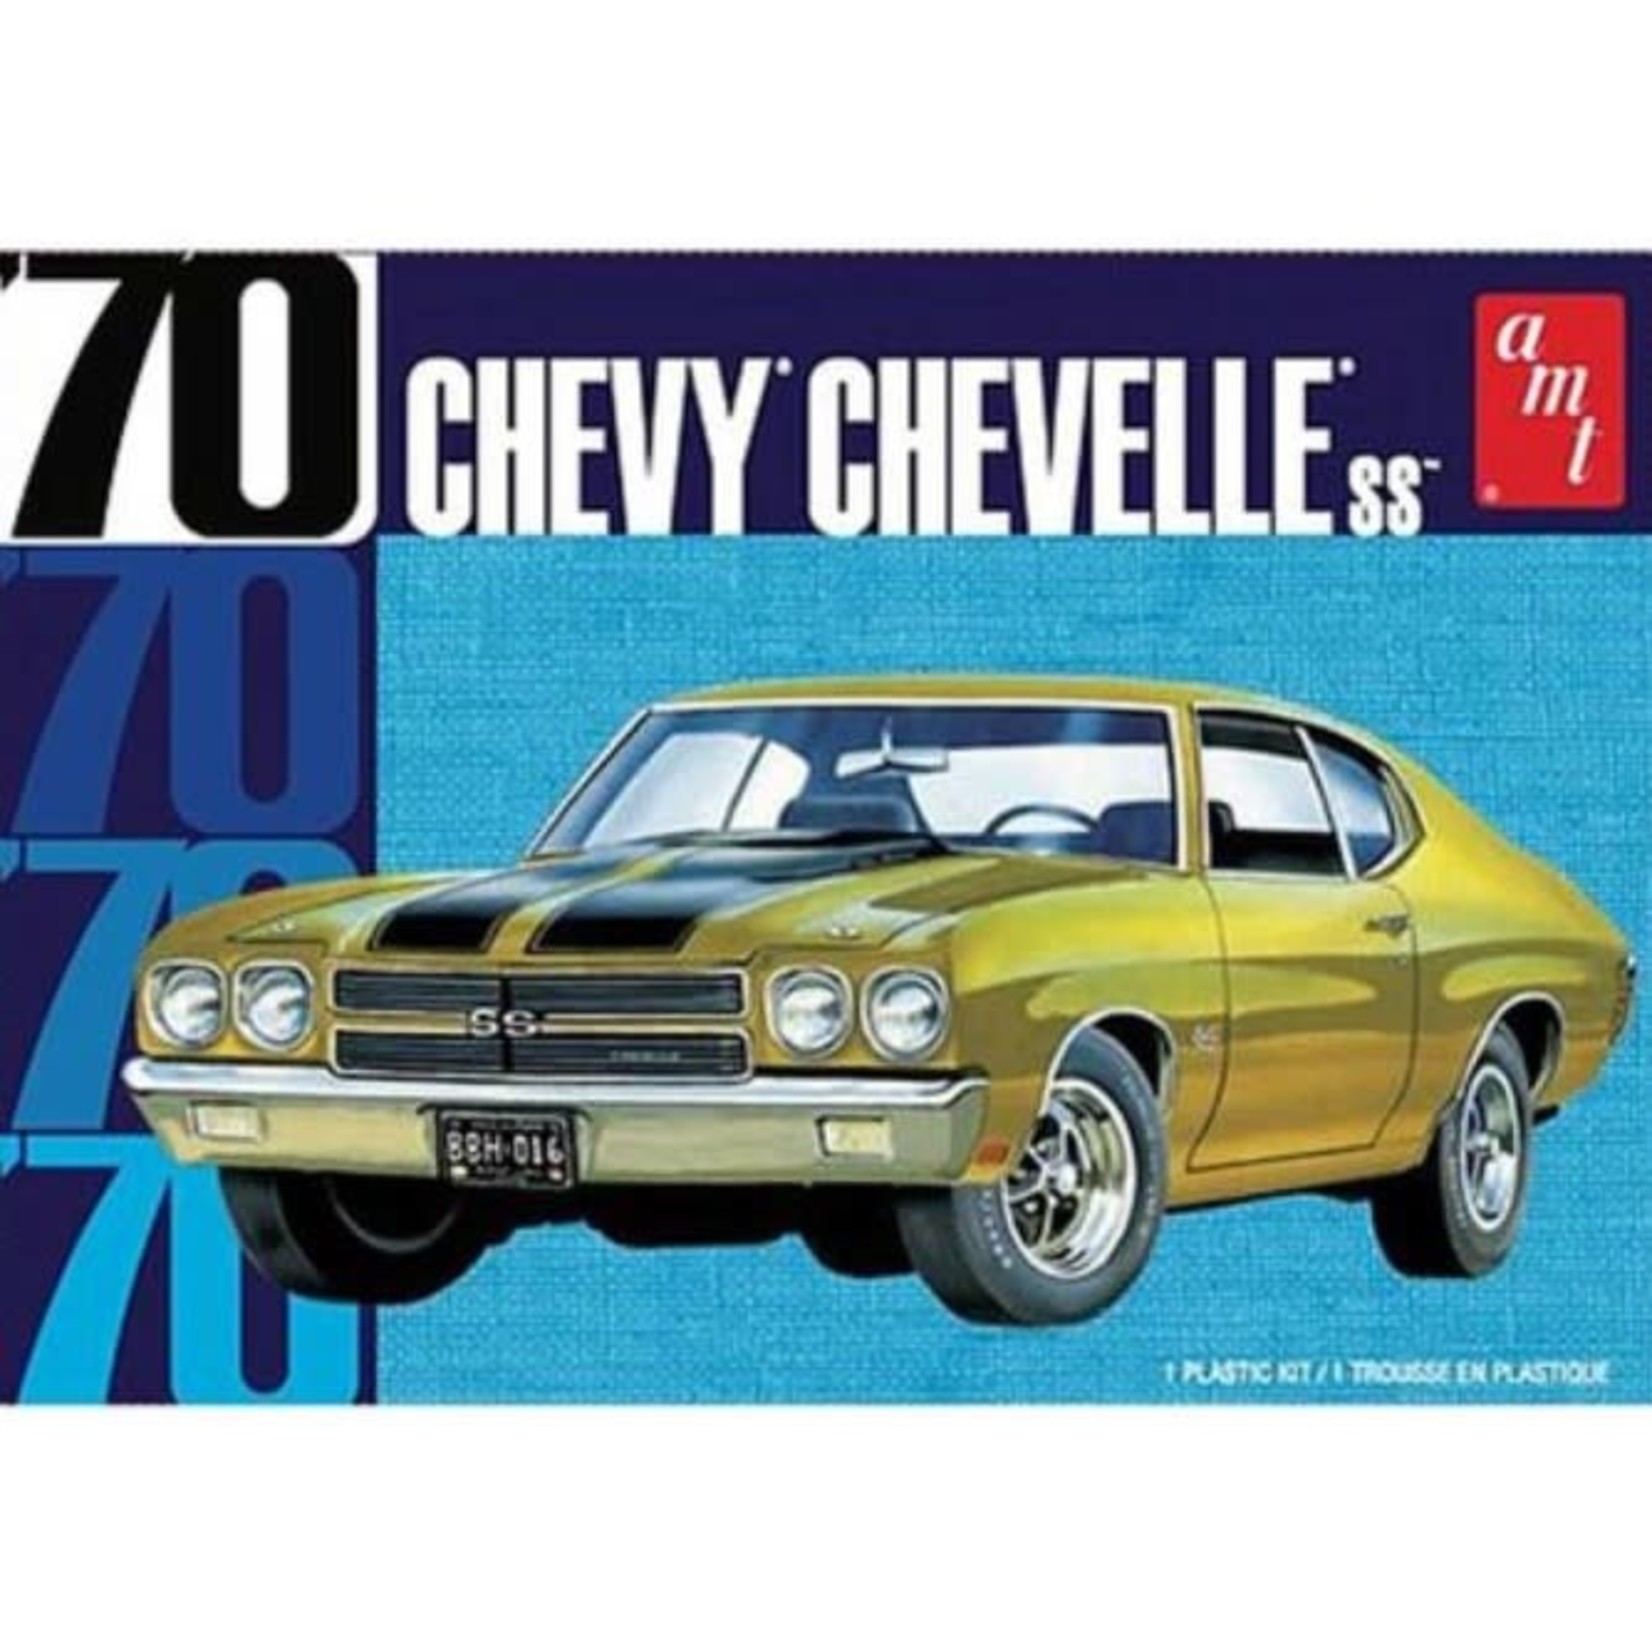 AMT 1/25 '70 Chevy Chevelle SS Kit